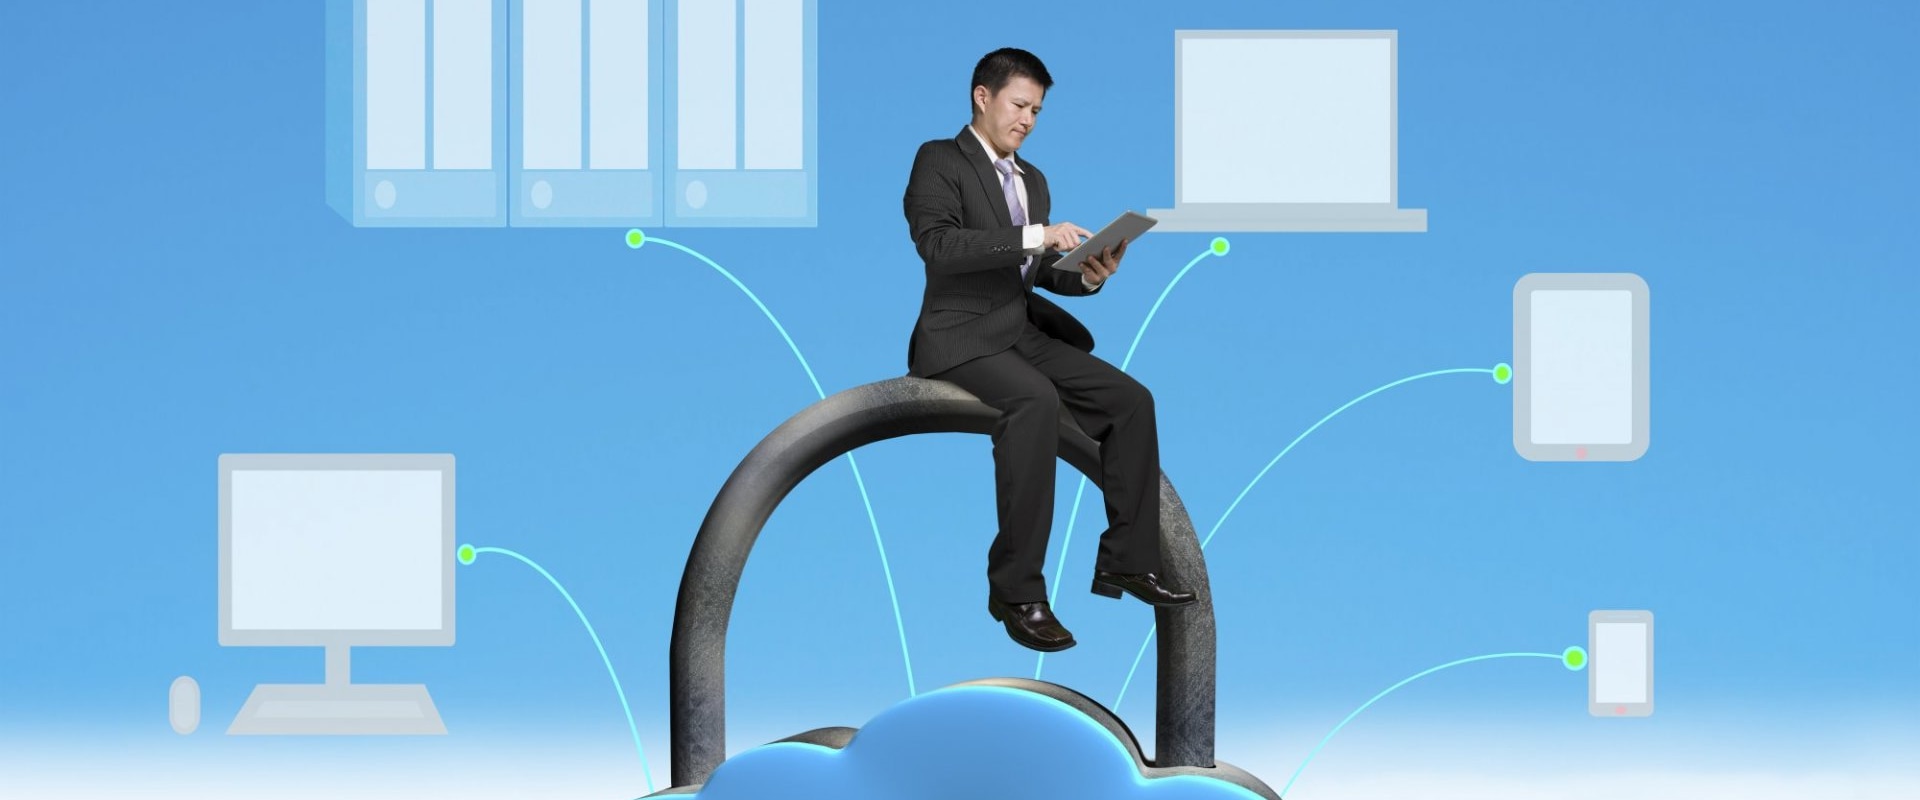 The Benefits of Managed IT Services for System Up-to-Date Performance